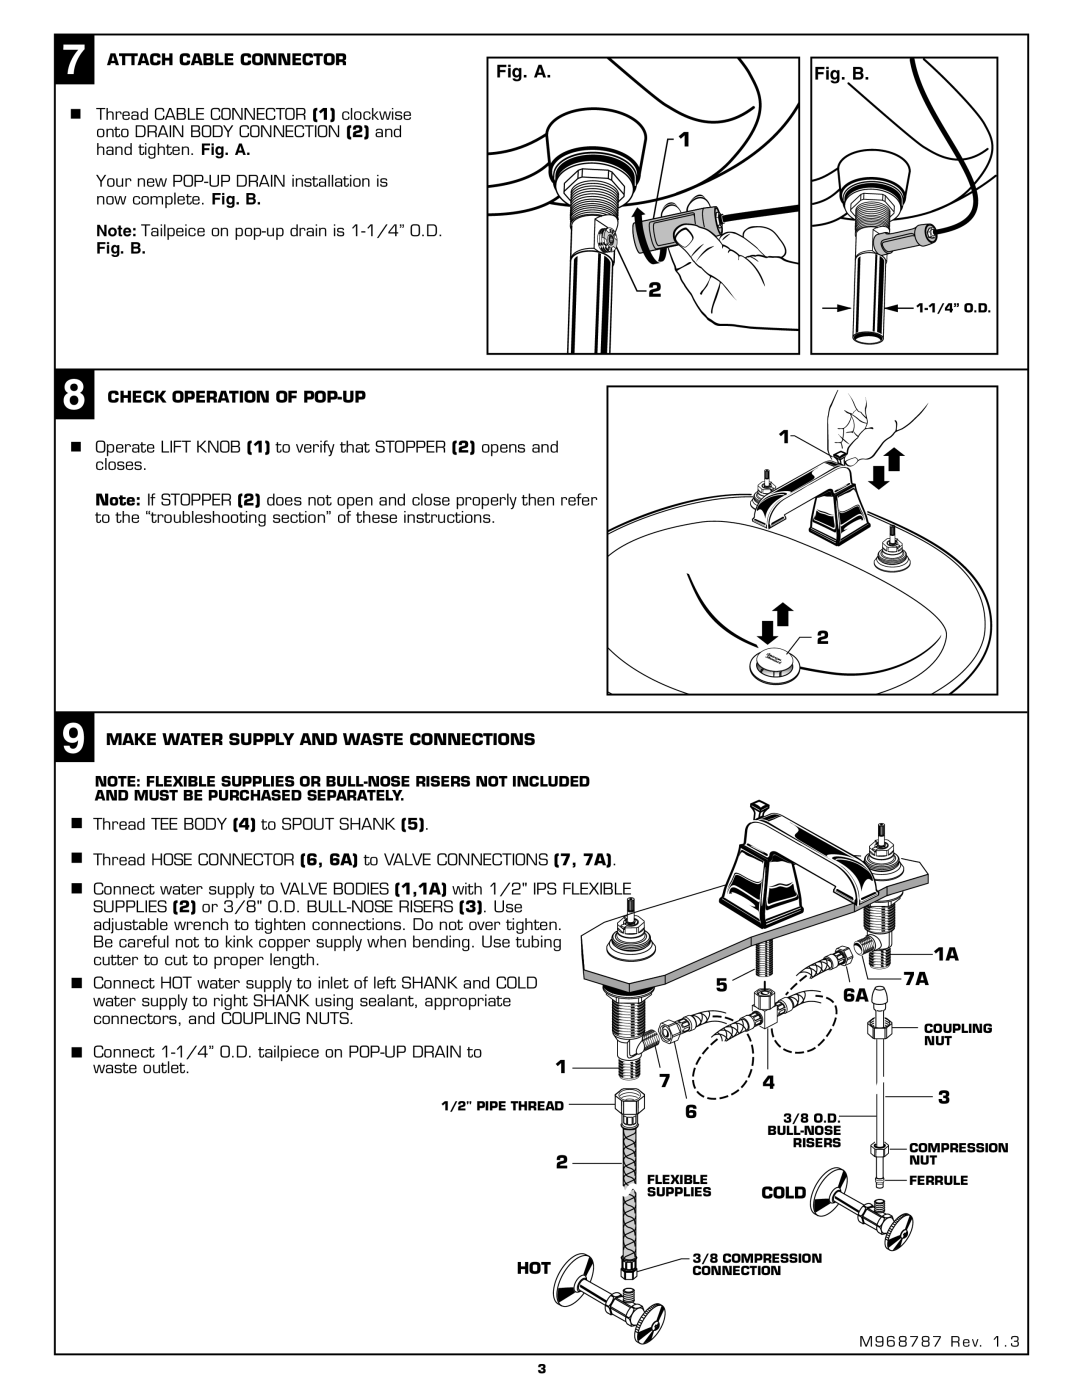 American Standard 2555.801 installation instructions Fig. A 